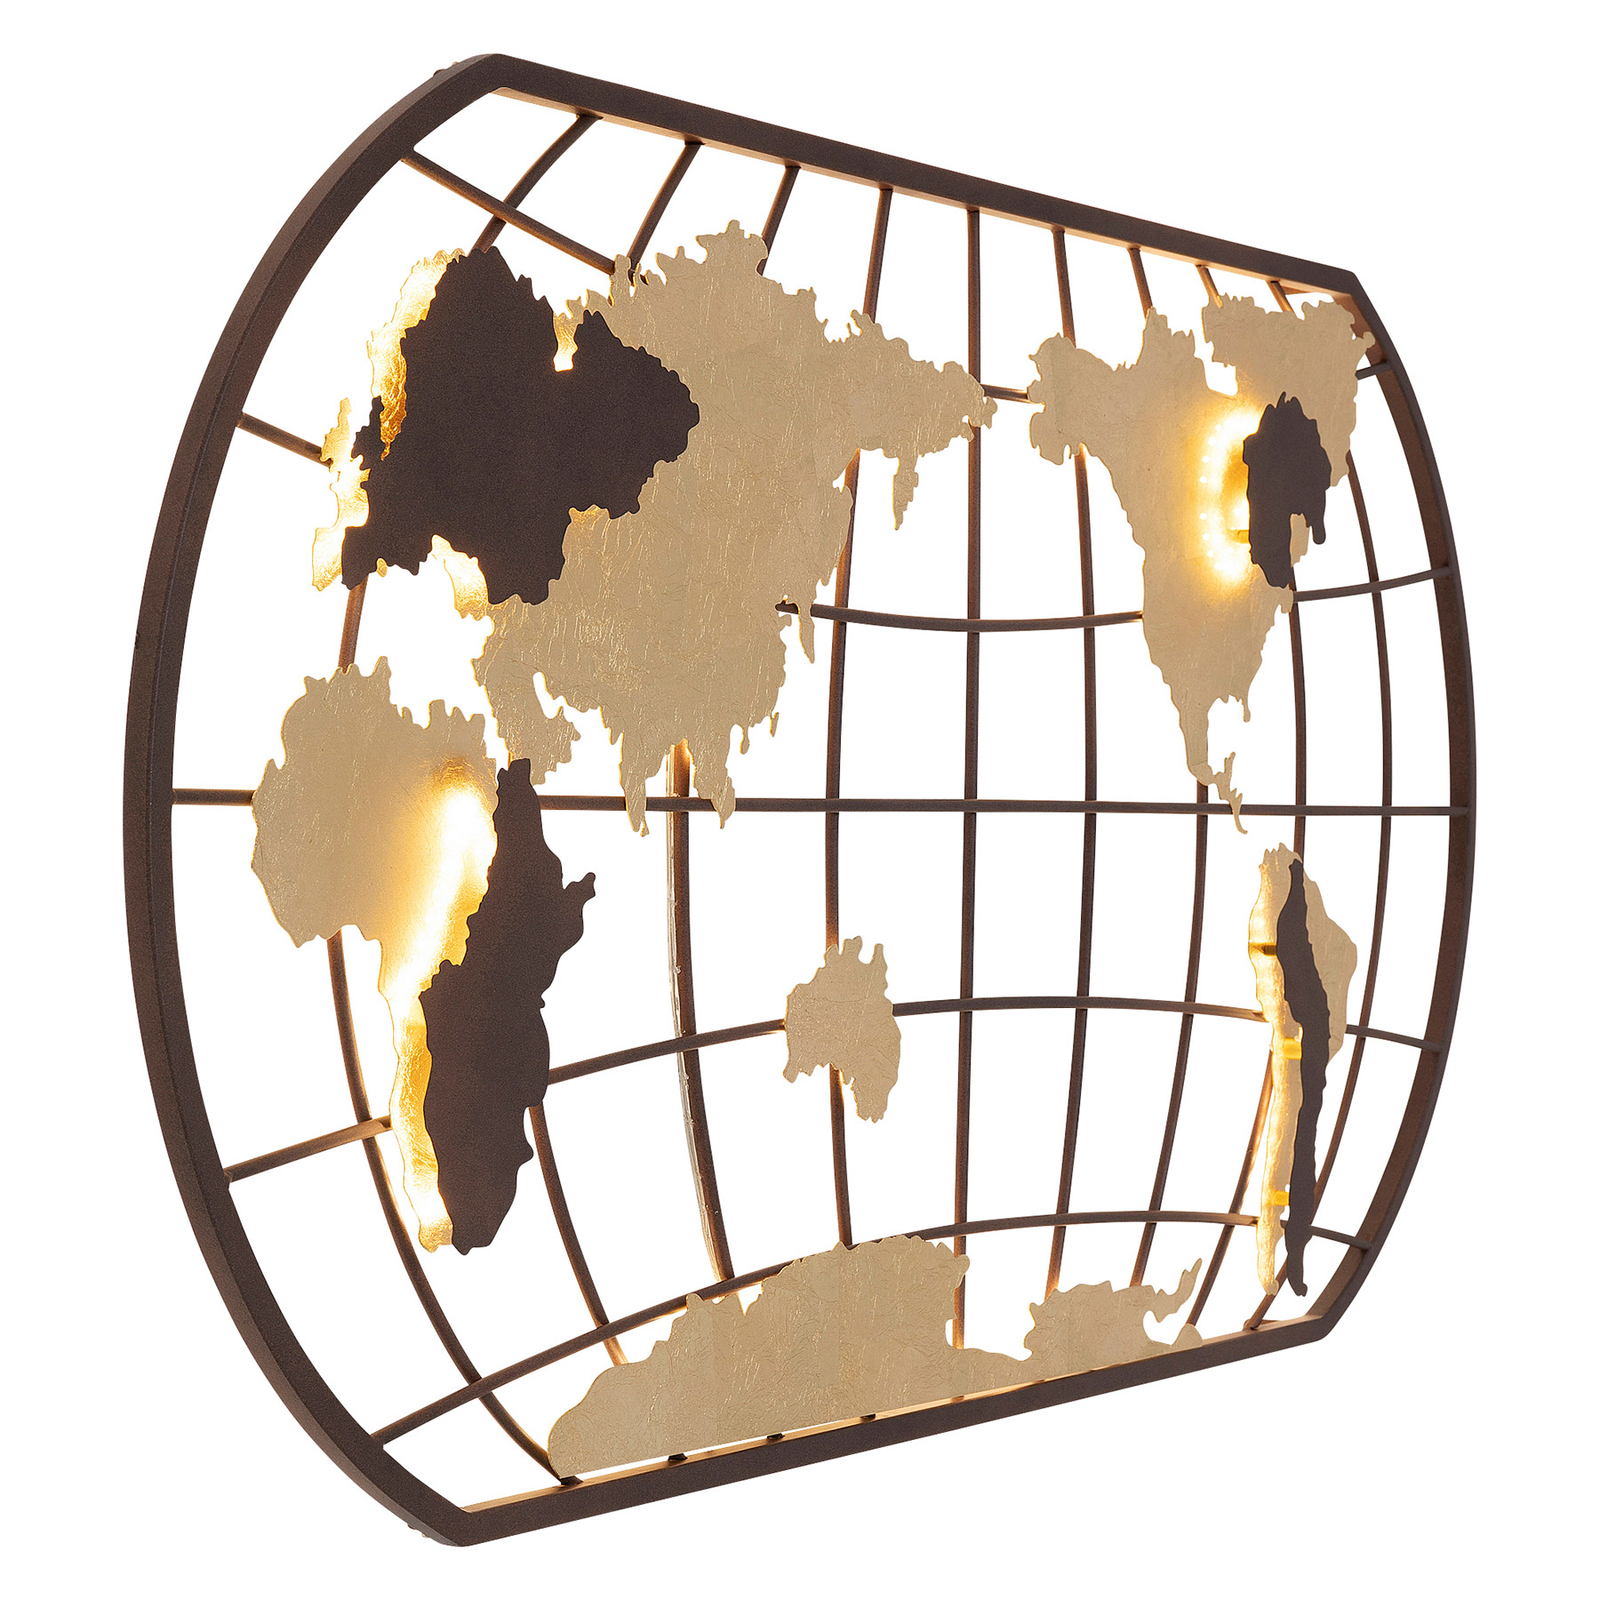 KARE Earth Grid LED wall light in brown/gold